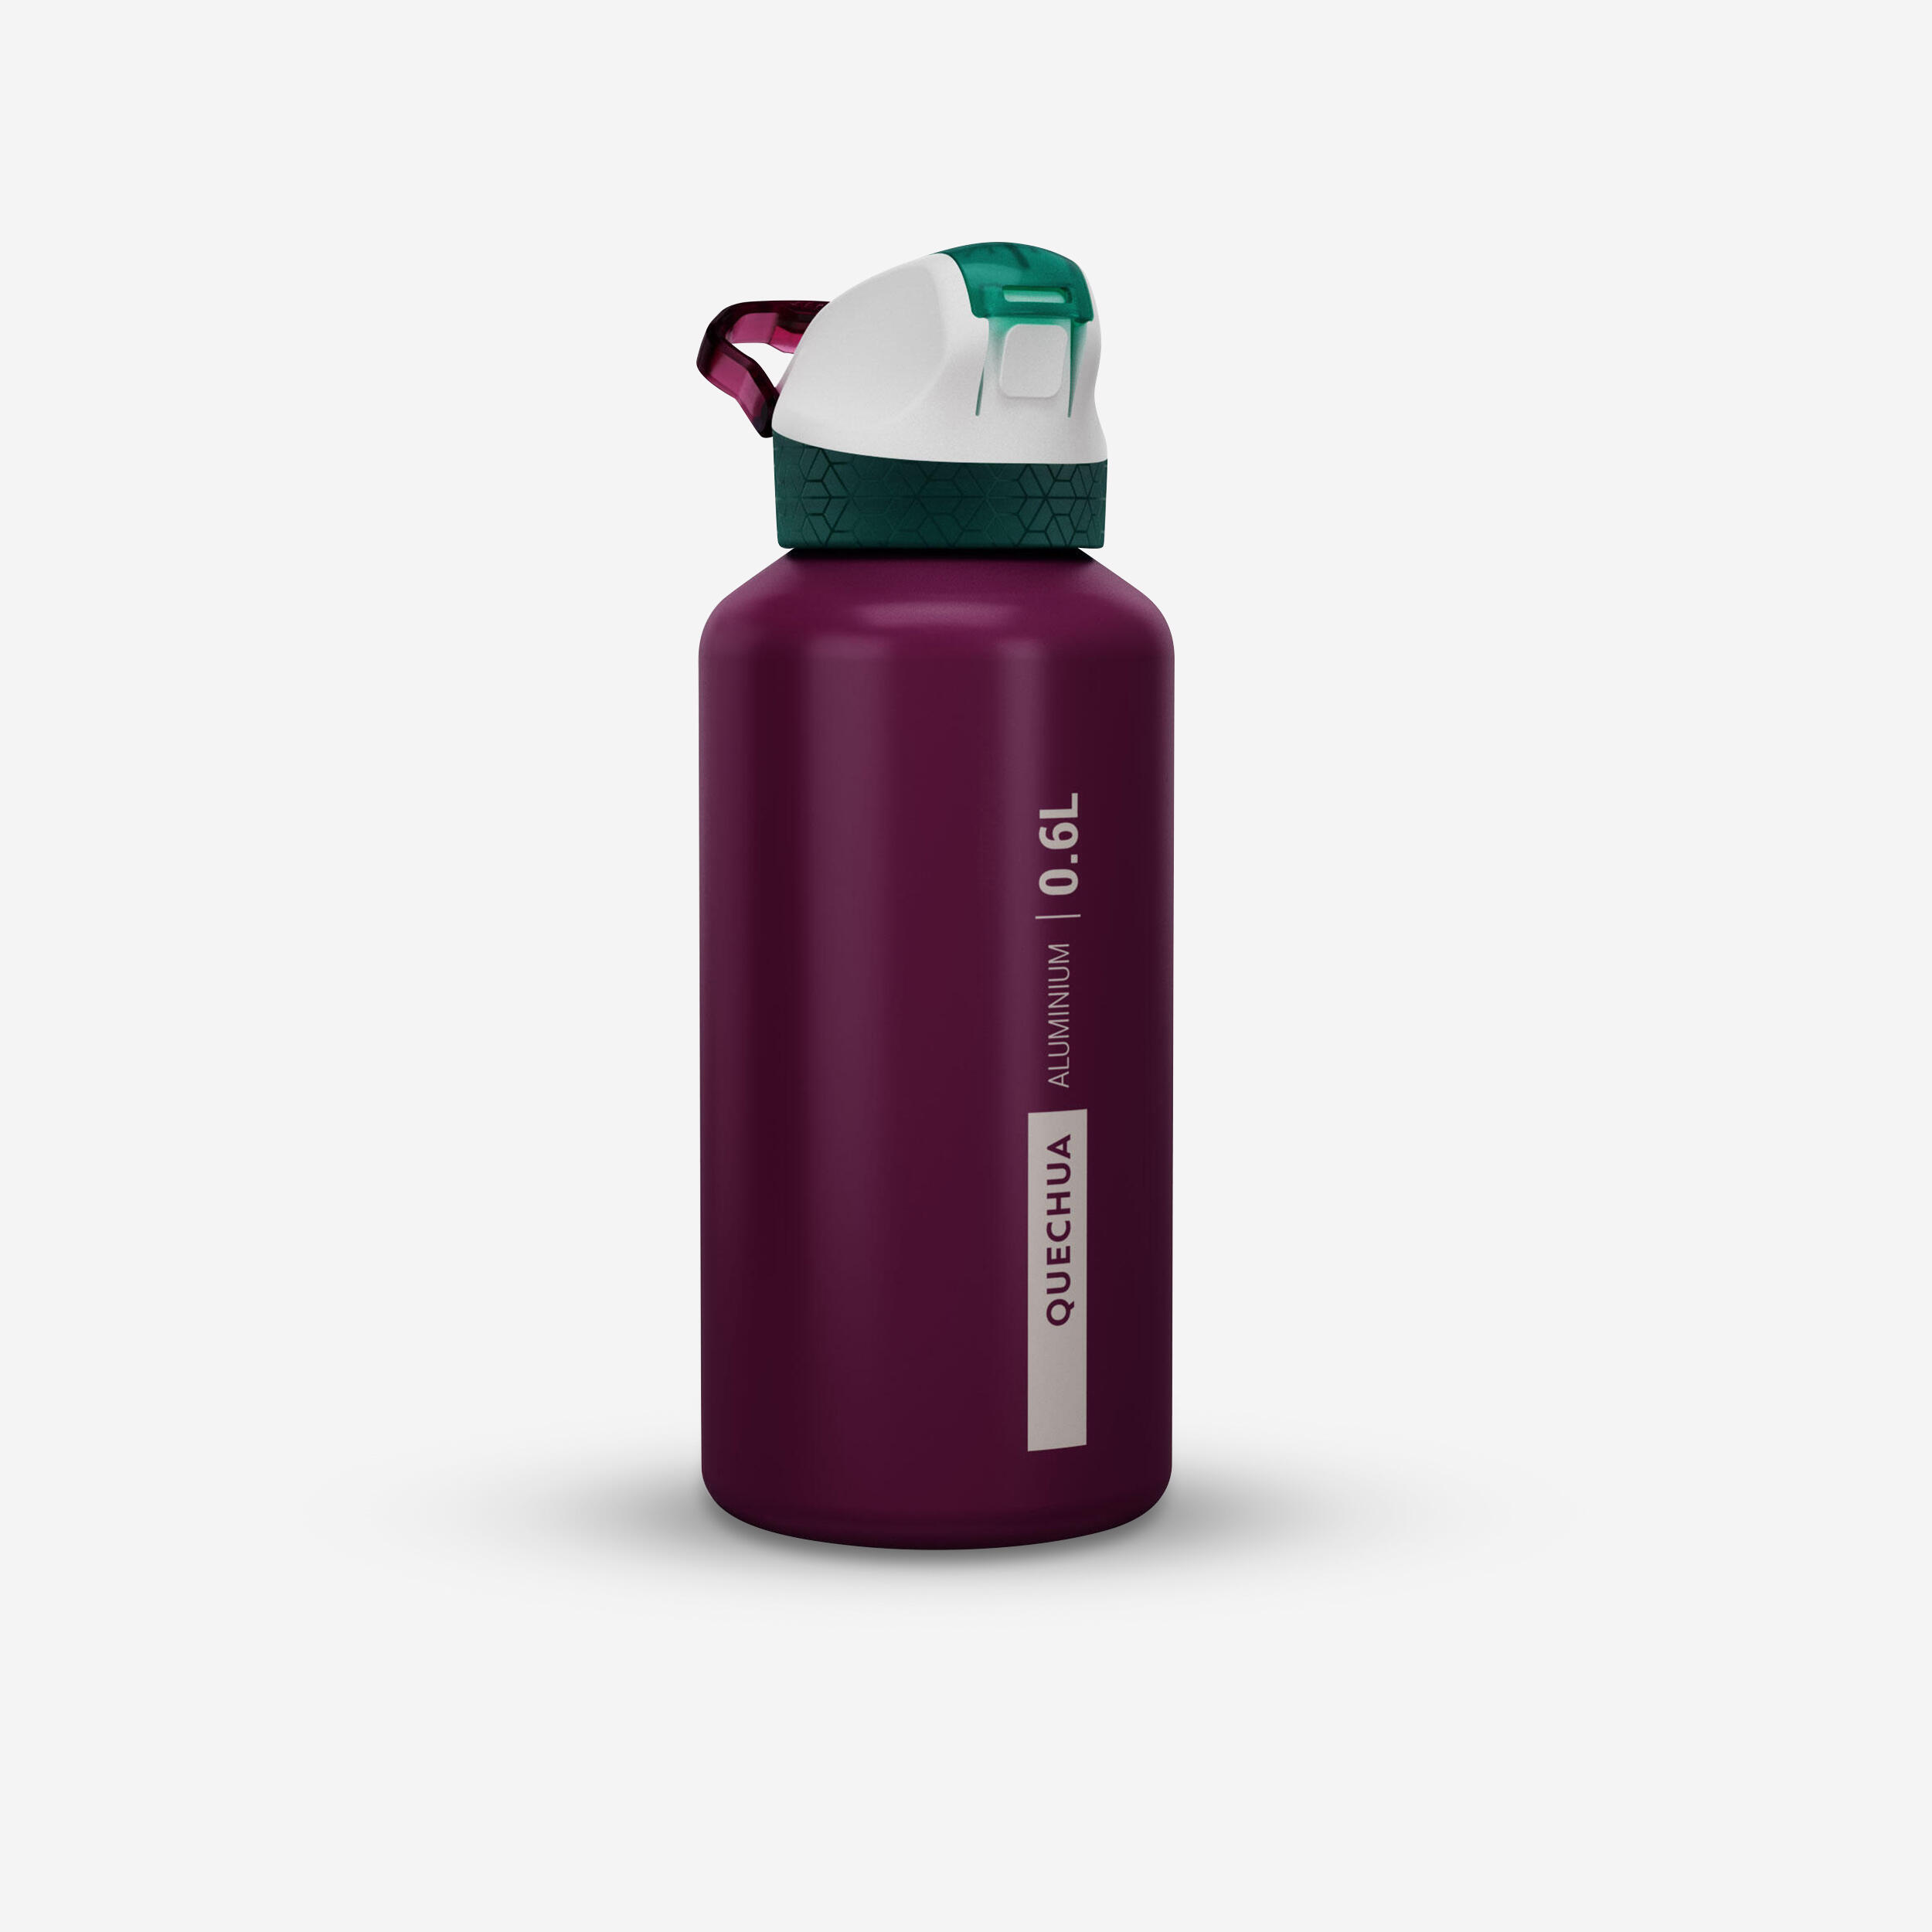 0.6 L aluminium flask with instant cap and pipette for hiking 1/12